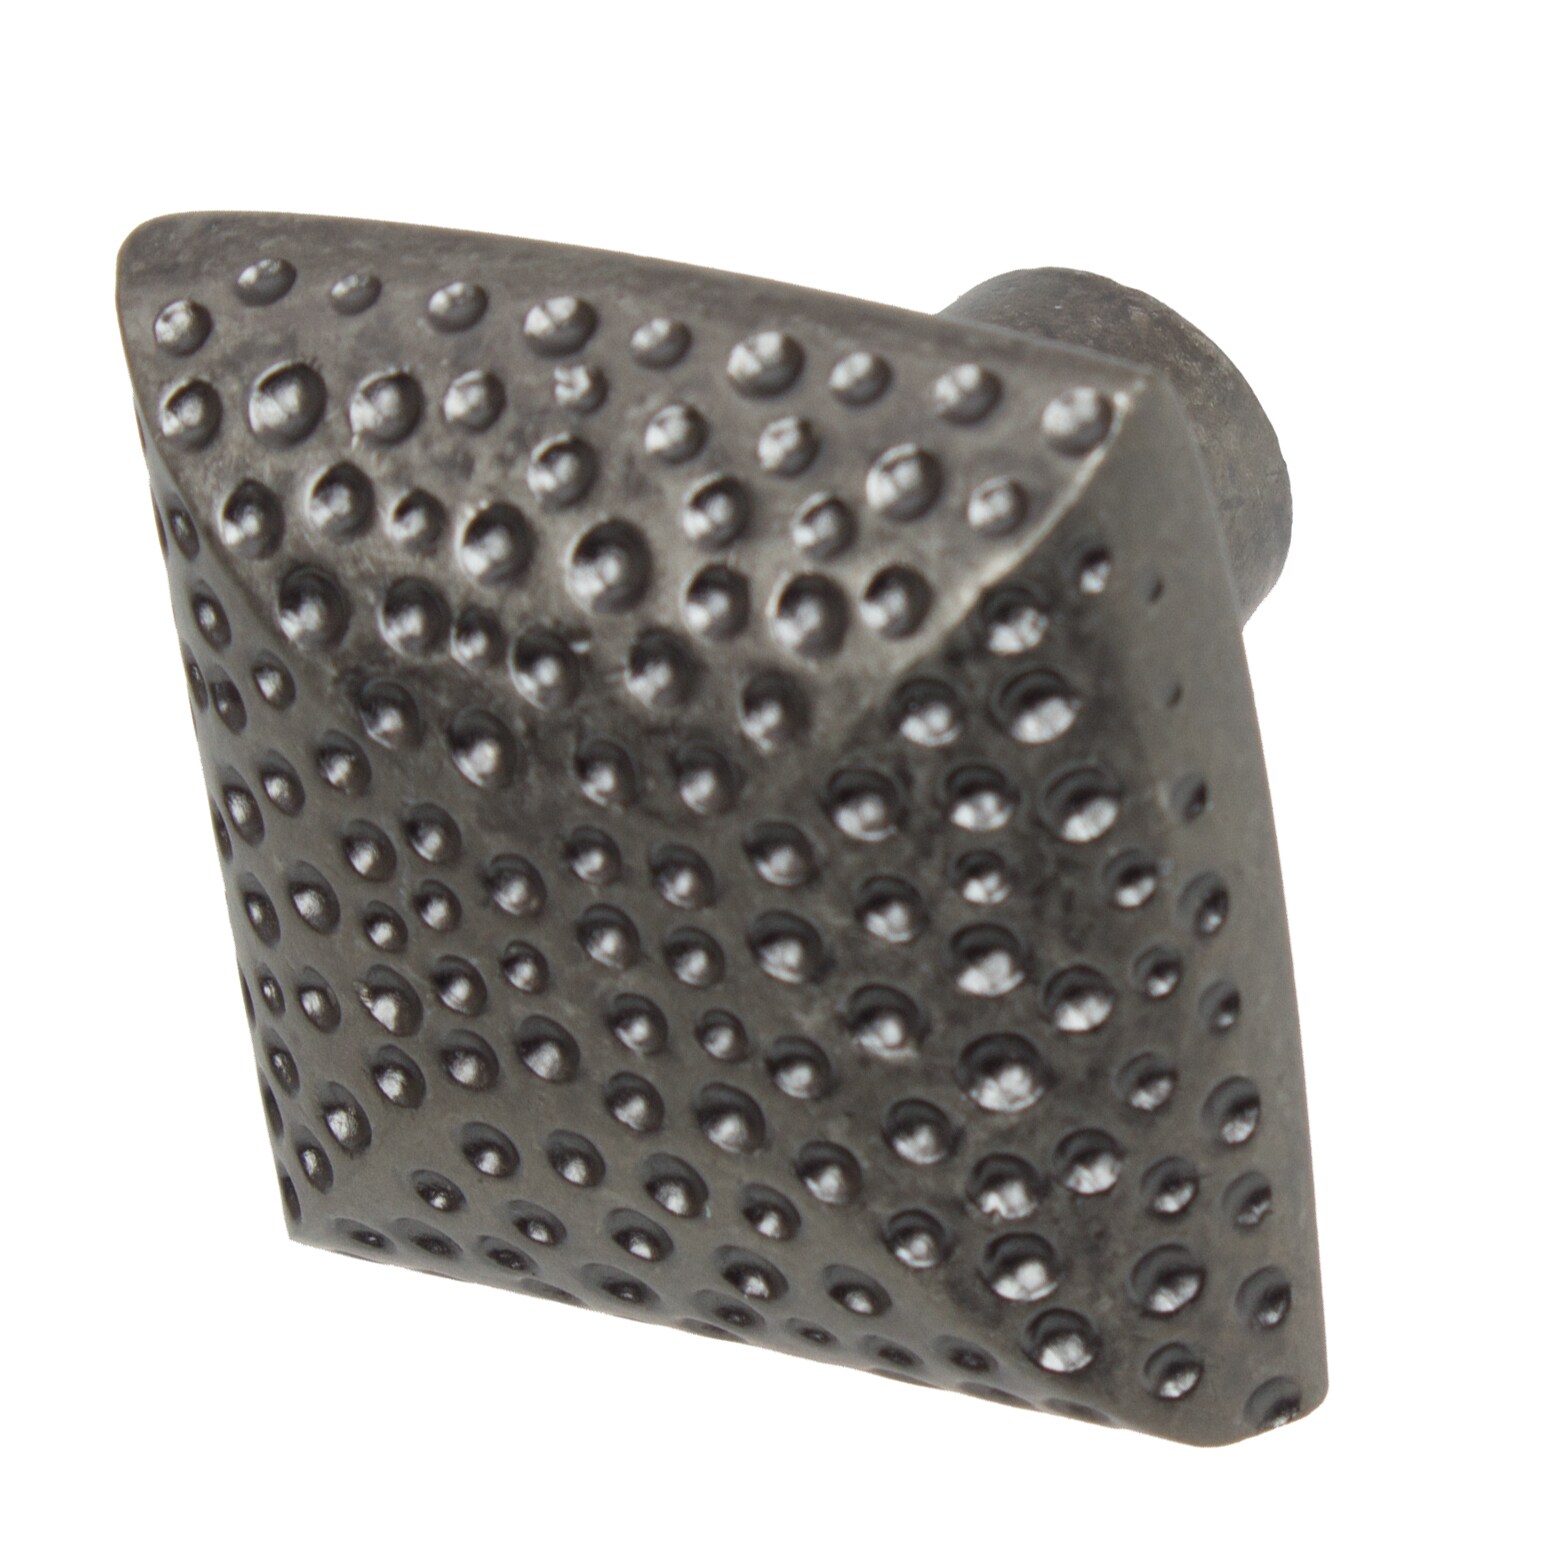 GlideRite 1-1/4 in. Dotted Hammered Transitional Square Cabinet Knobs, Aged Pewter, Pack of 25 - image 4 of 5